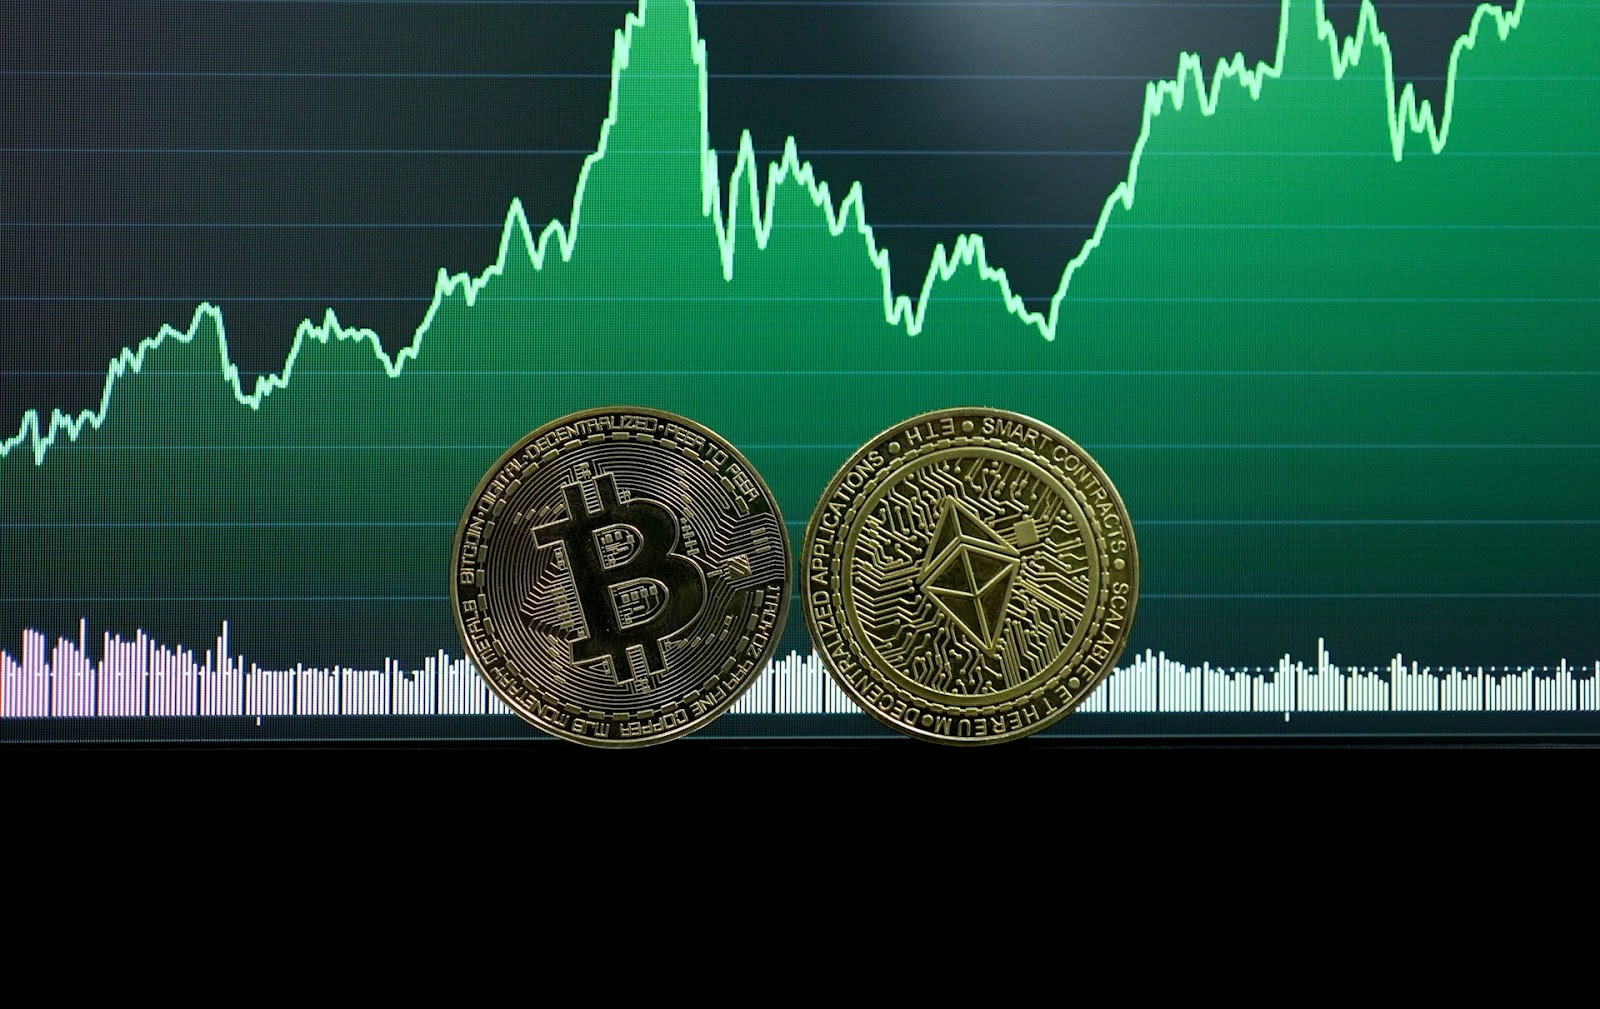 sample bitcoin ethereum coins with a graph showing upward trend